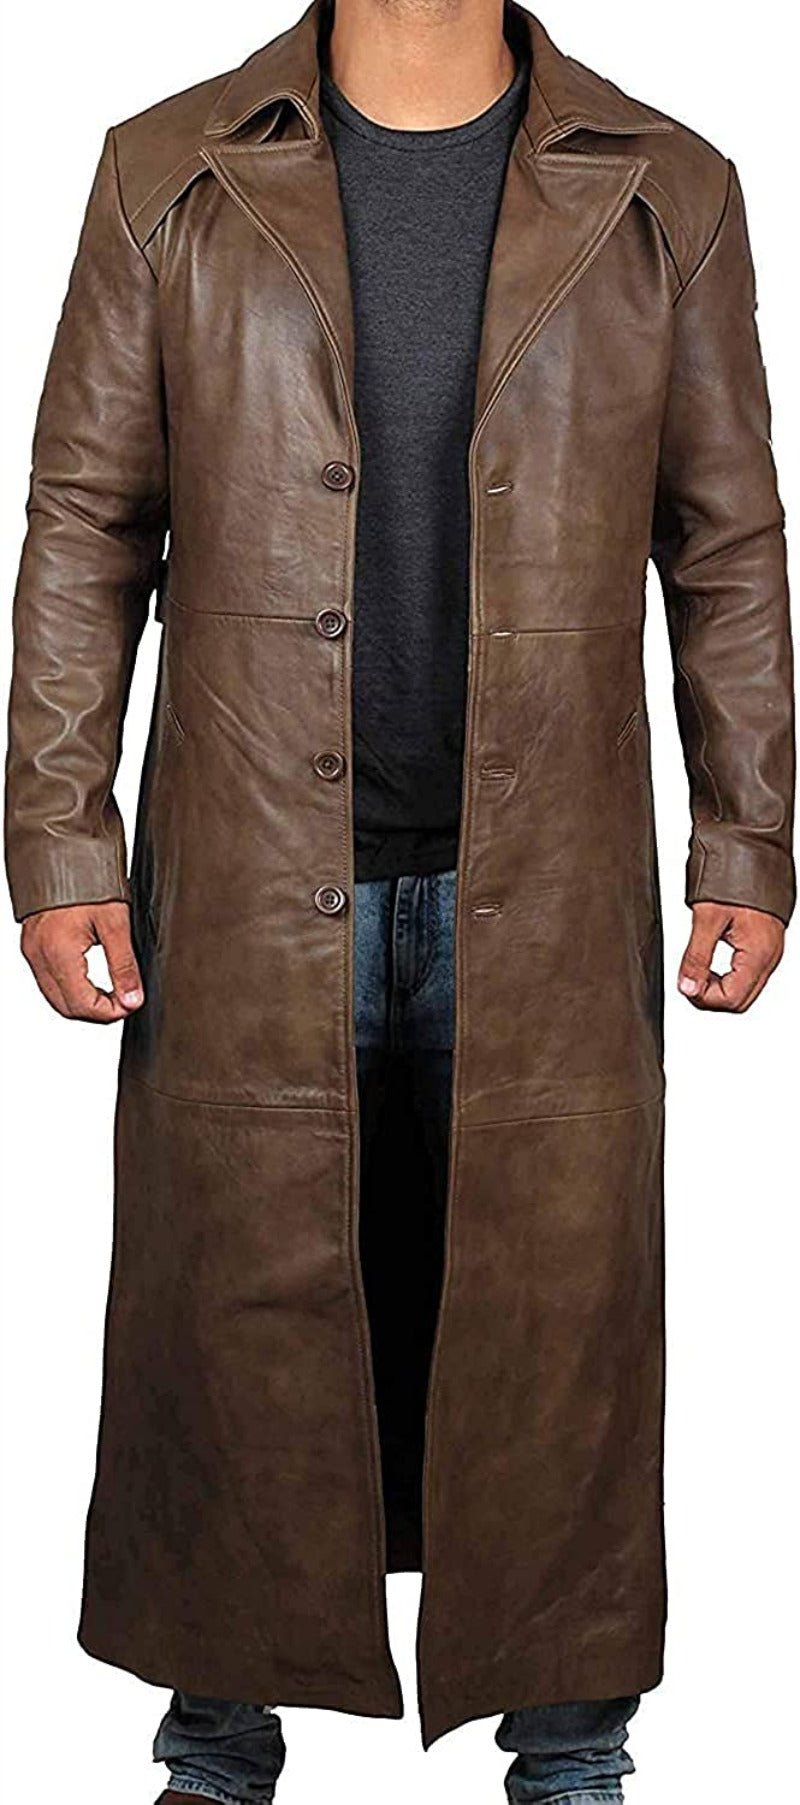 Picture of a model wearing our mens leather trench coat full length . Light brown  color, front view unbuttoned.